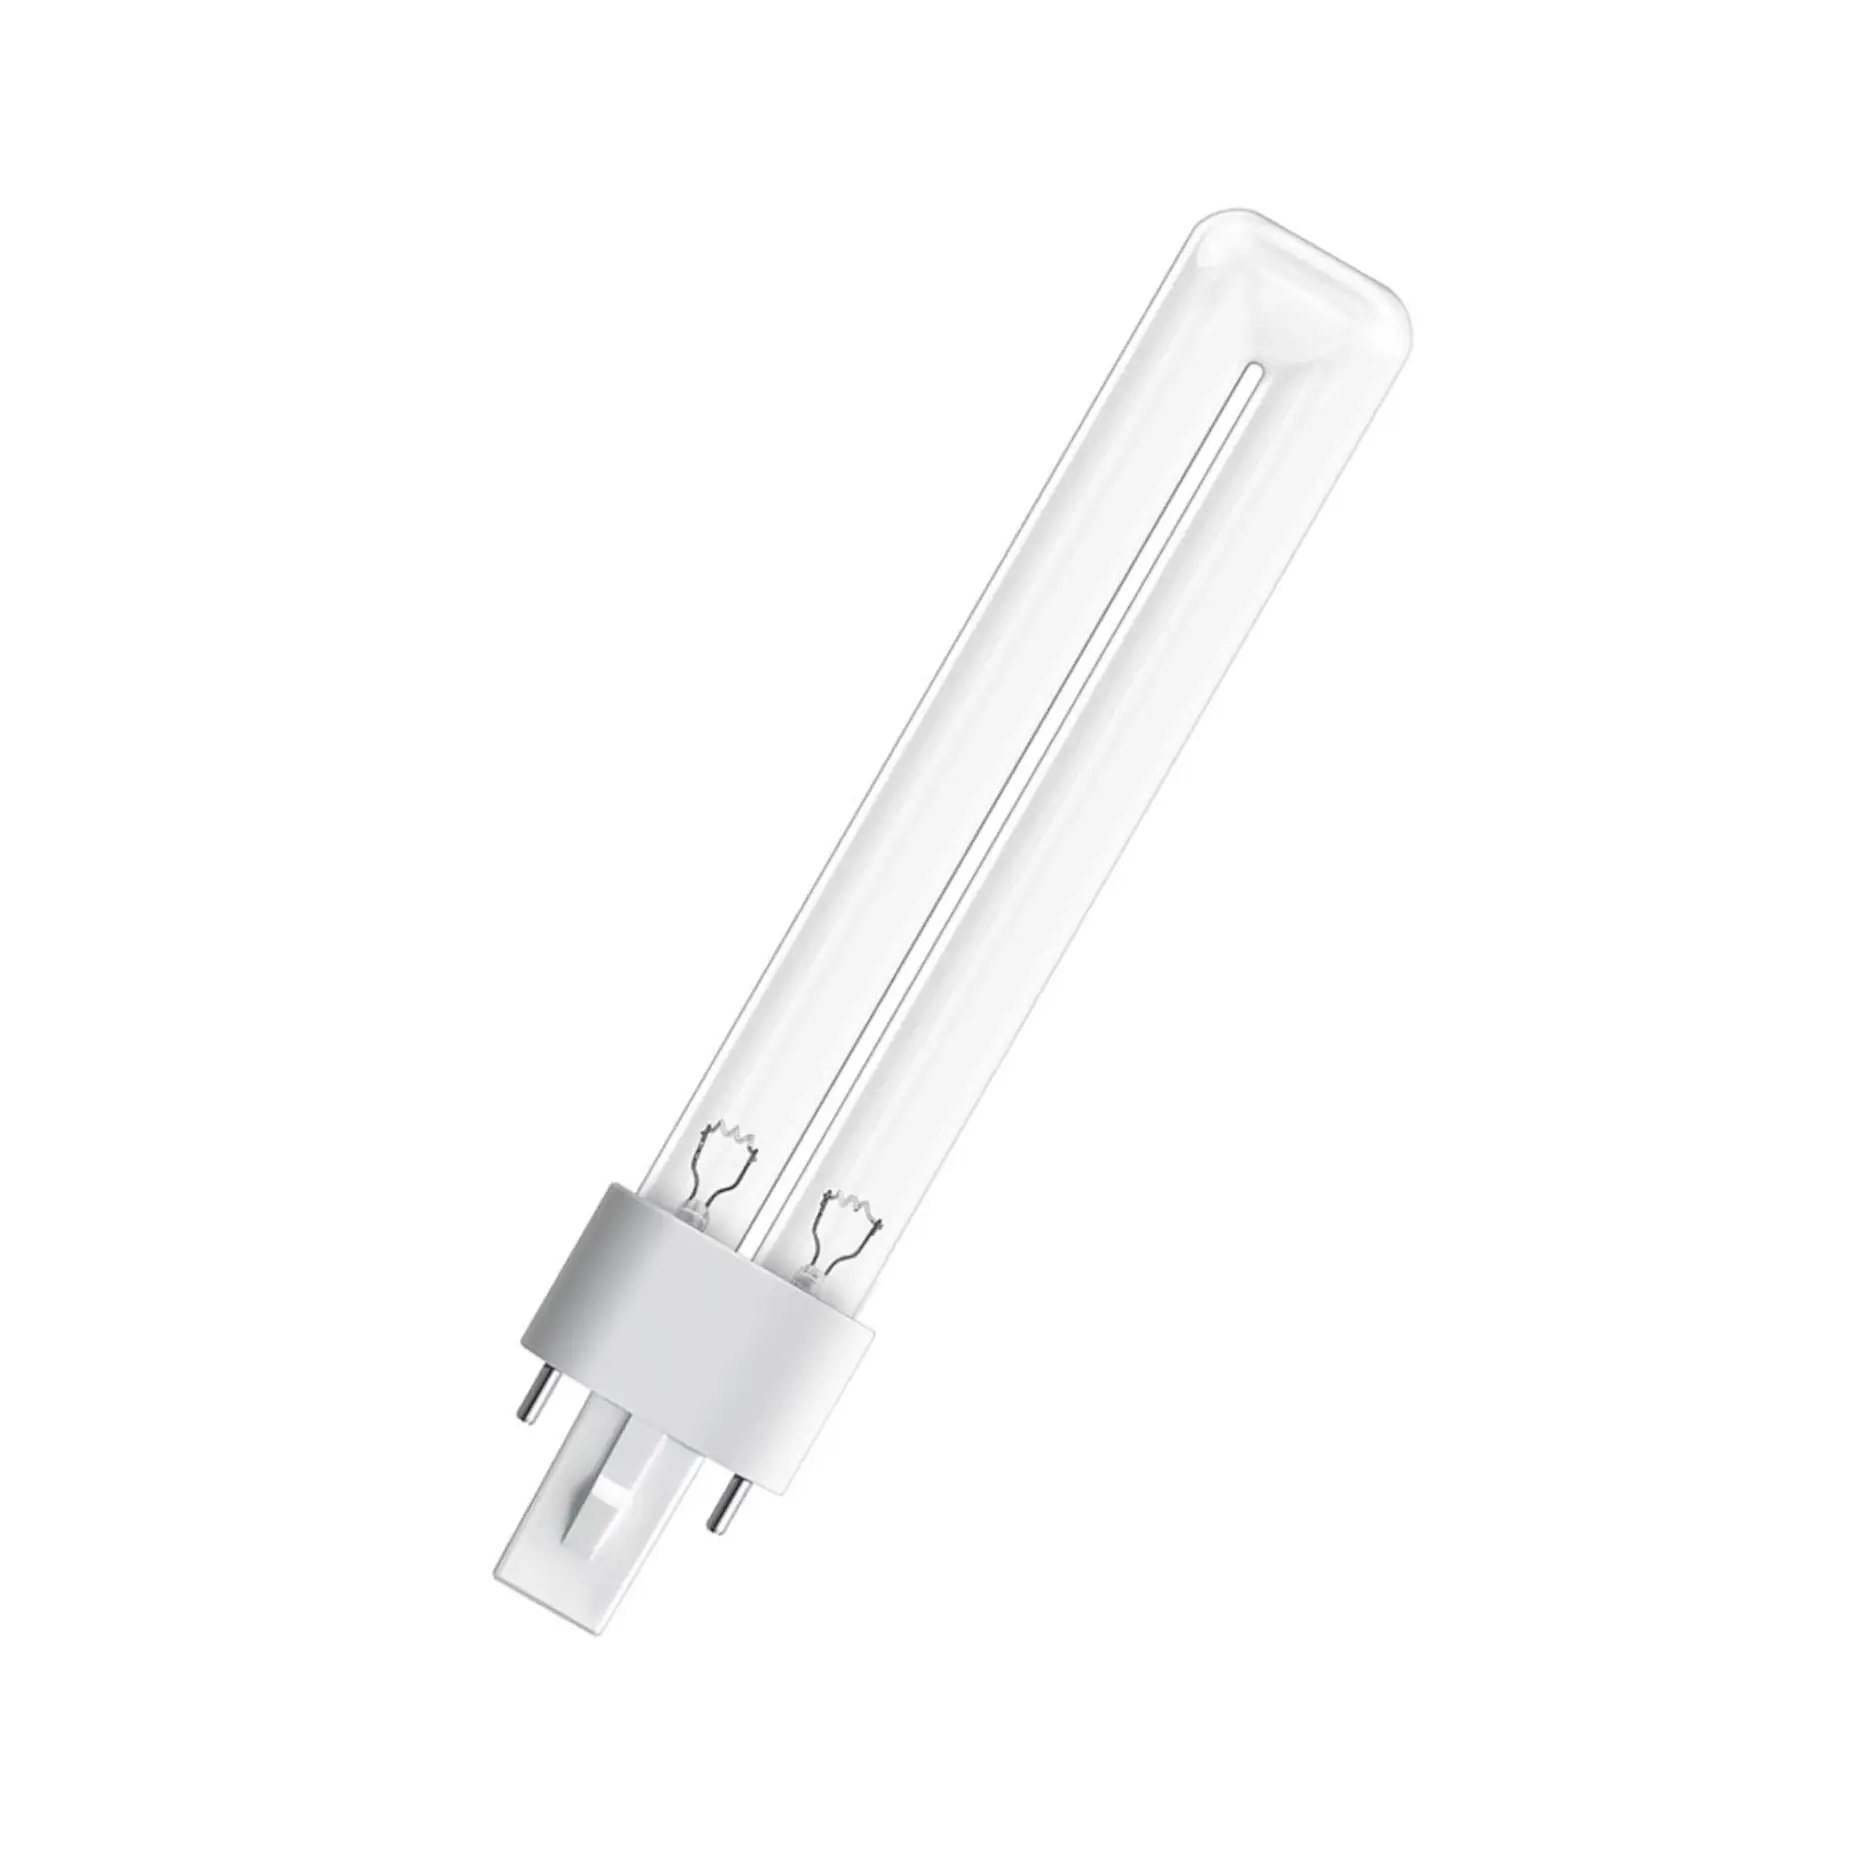 HNS S 7W G23Disinfection Lamps